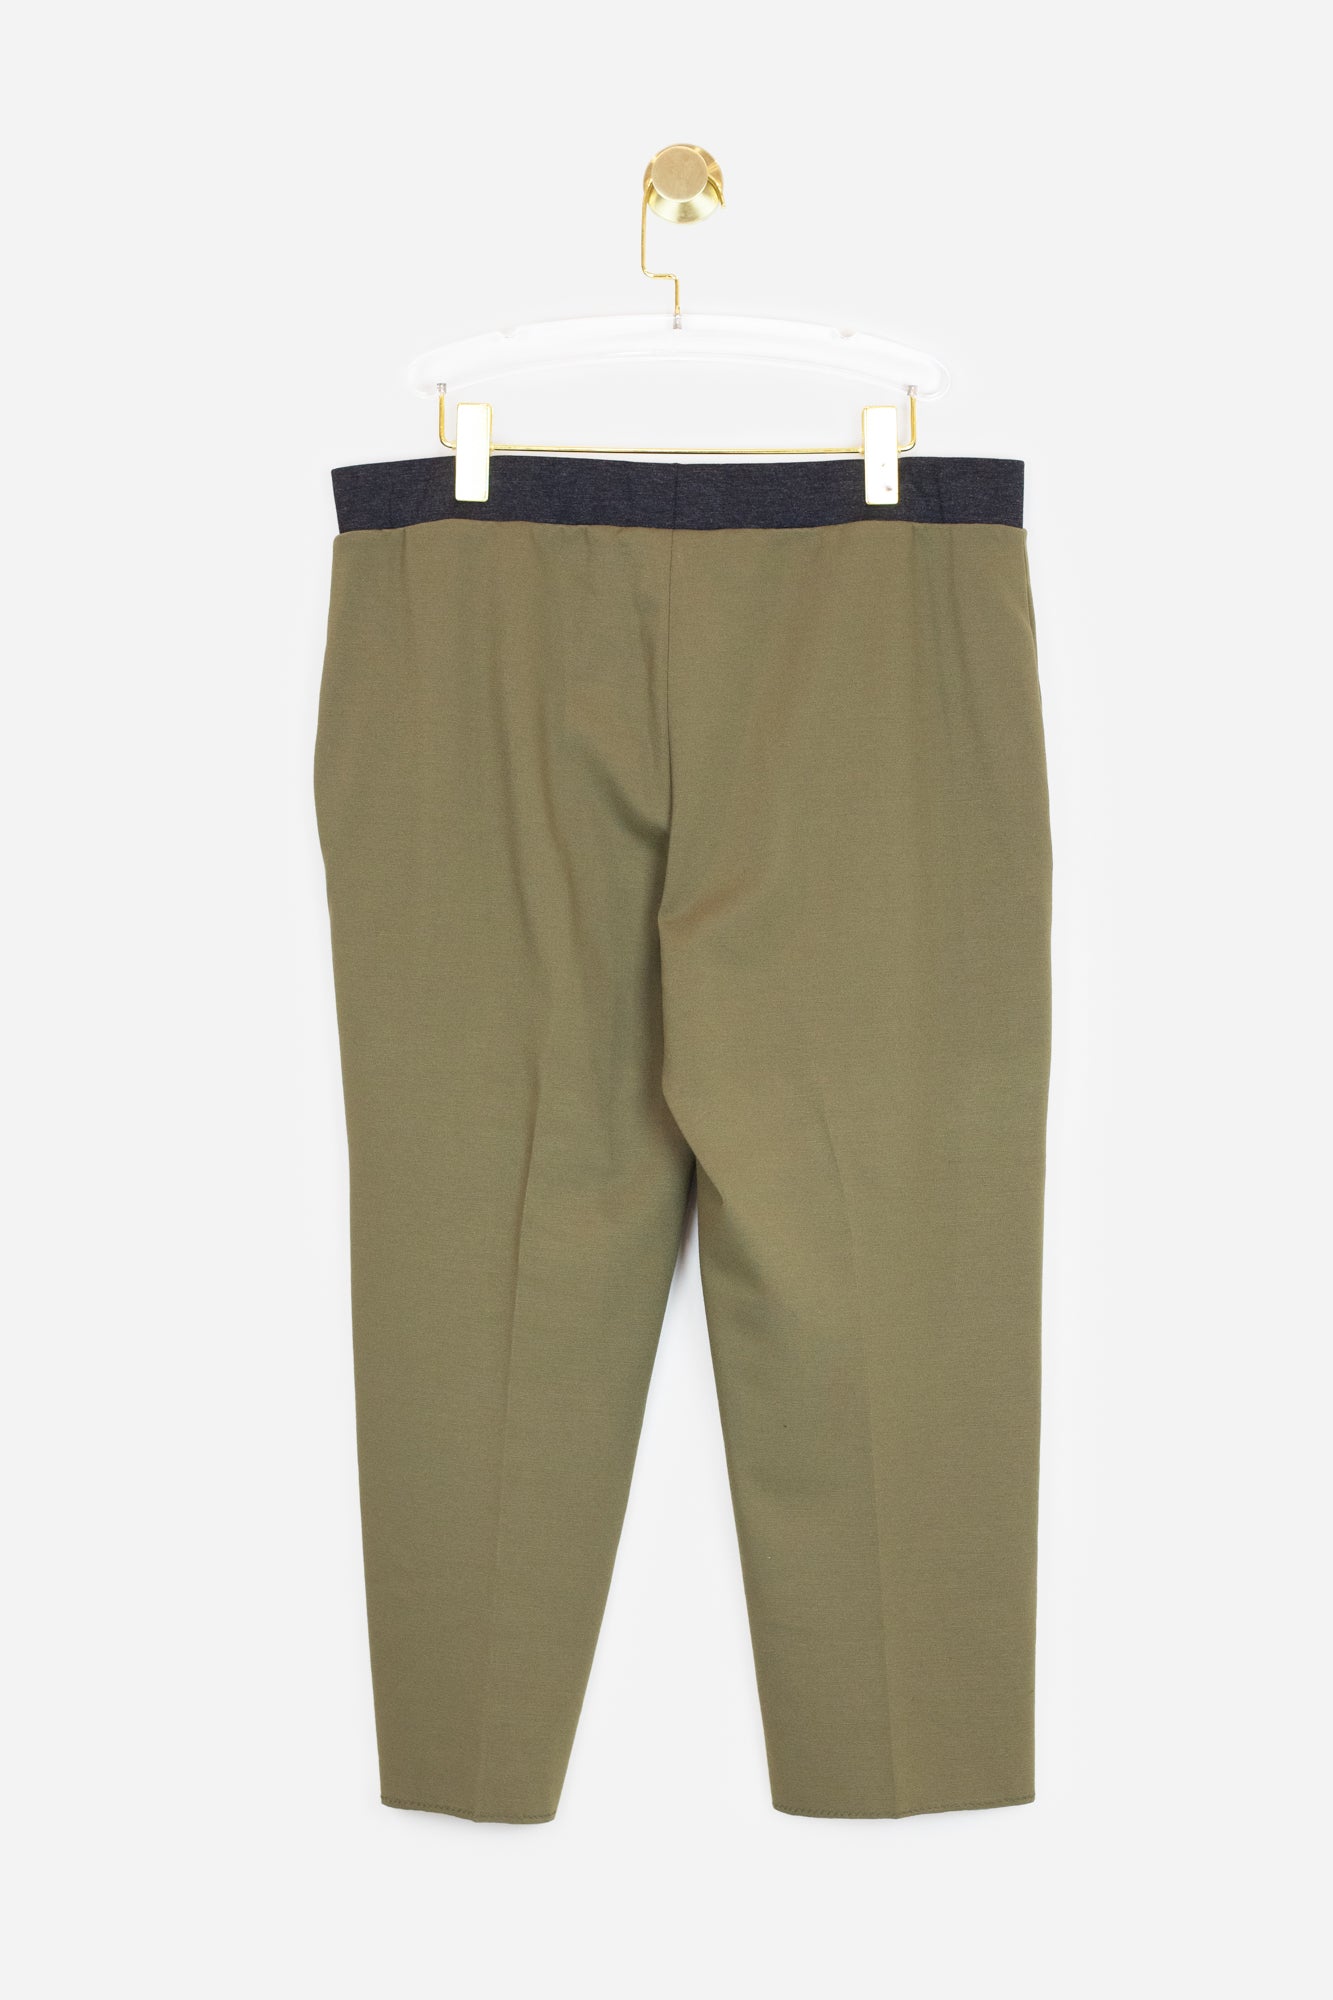 Olive Green Trousers - So Over It Luxury Consignment